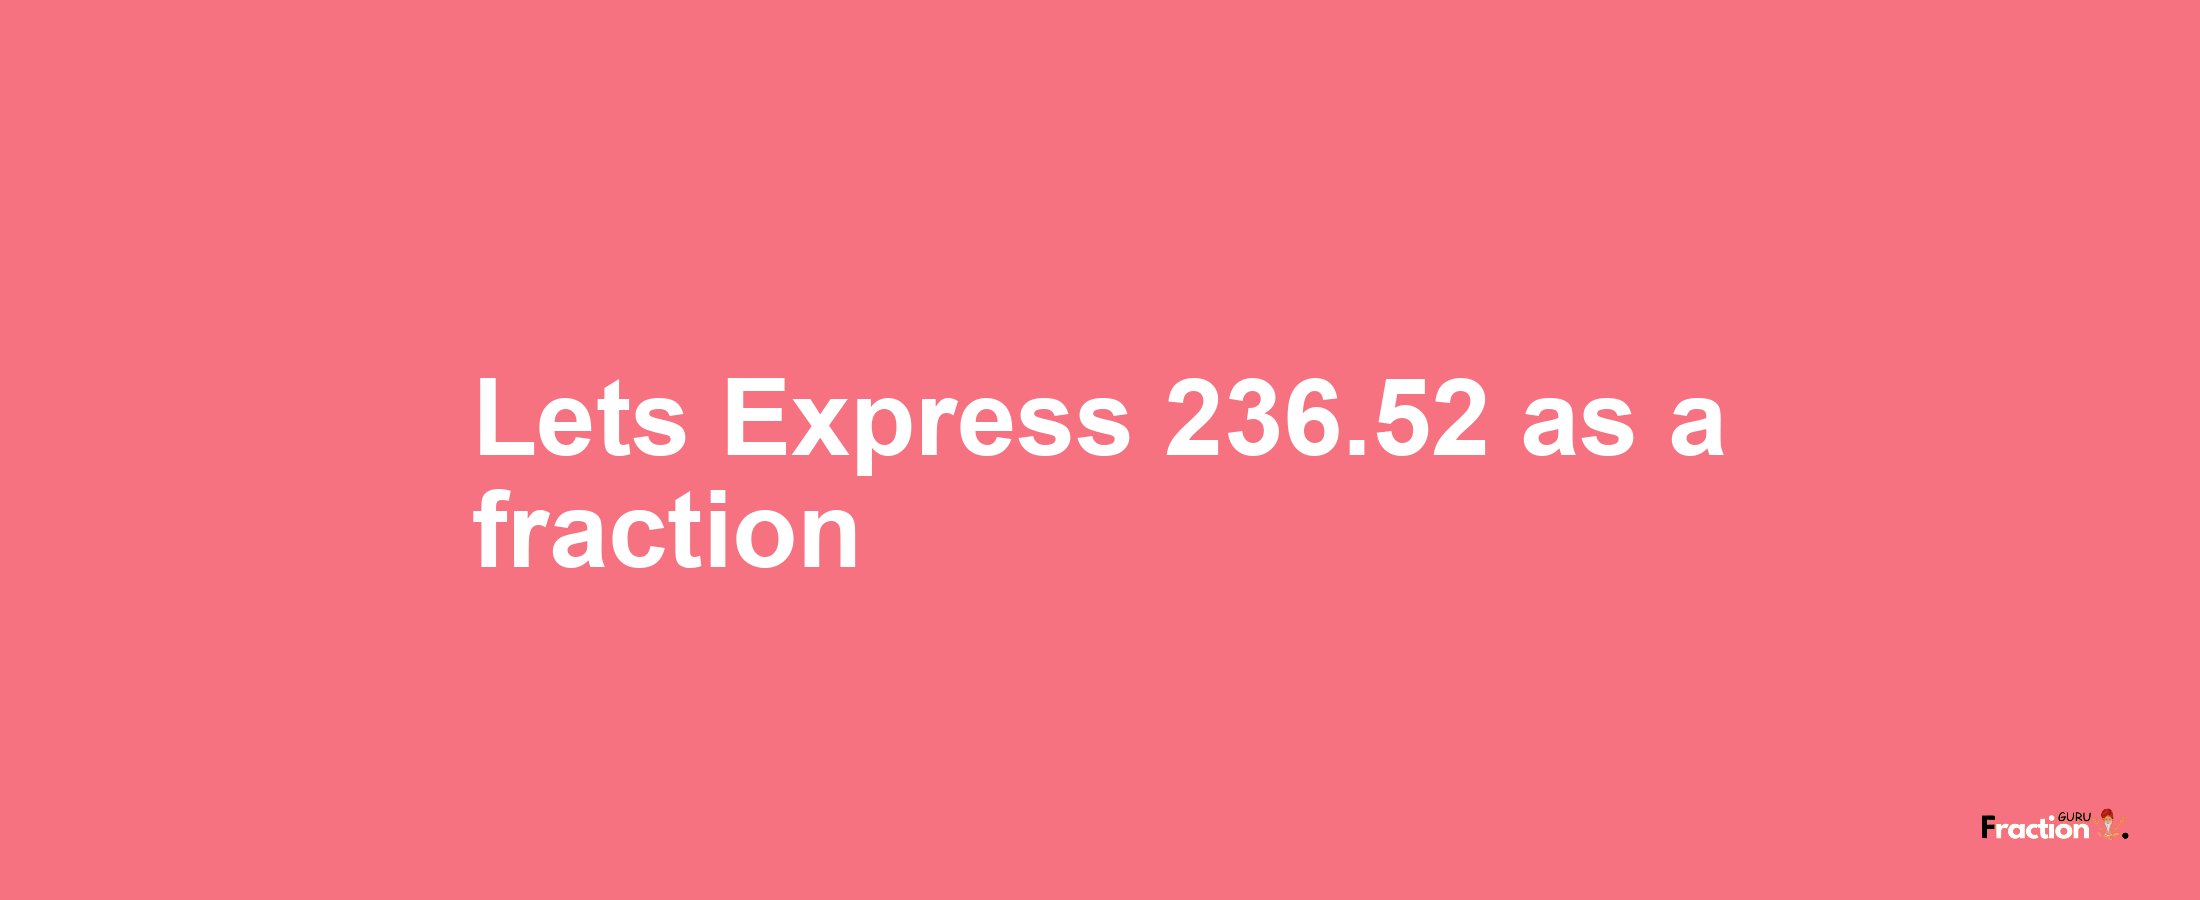 Lets Express 236.52 as afraction